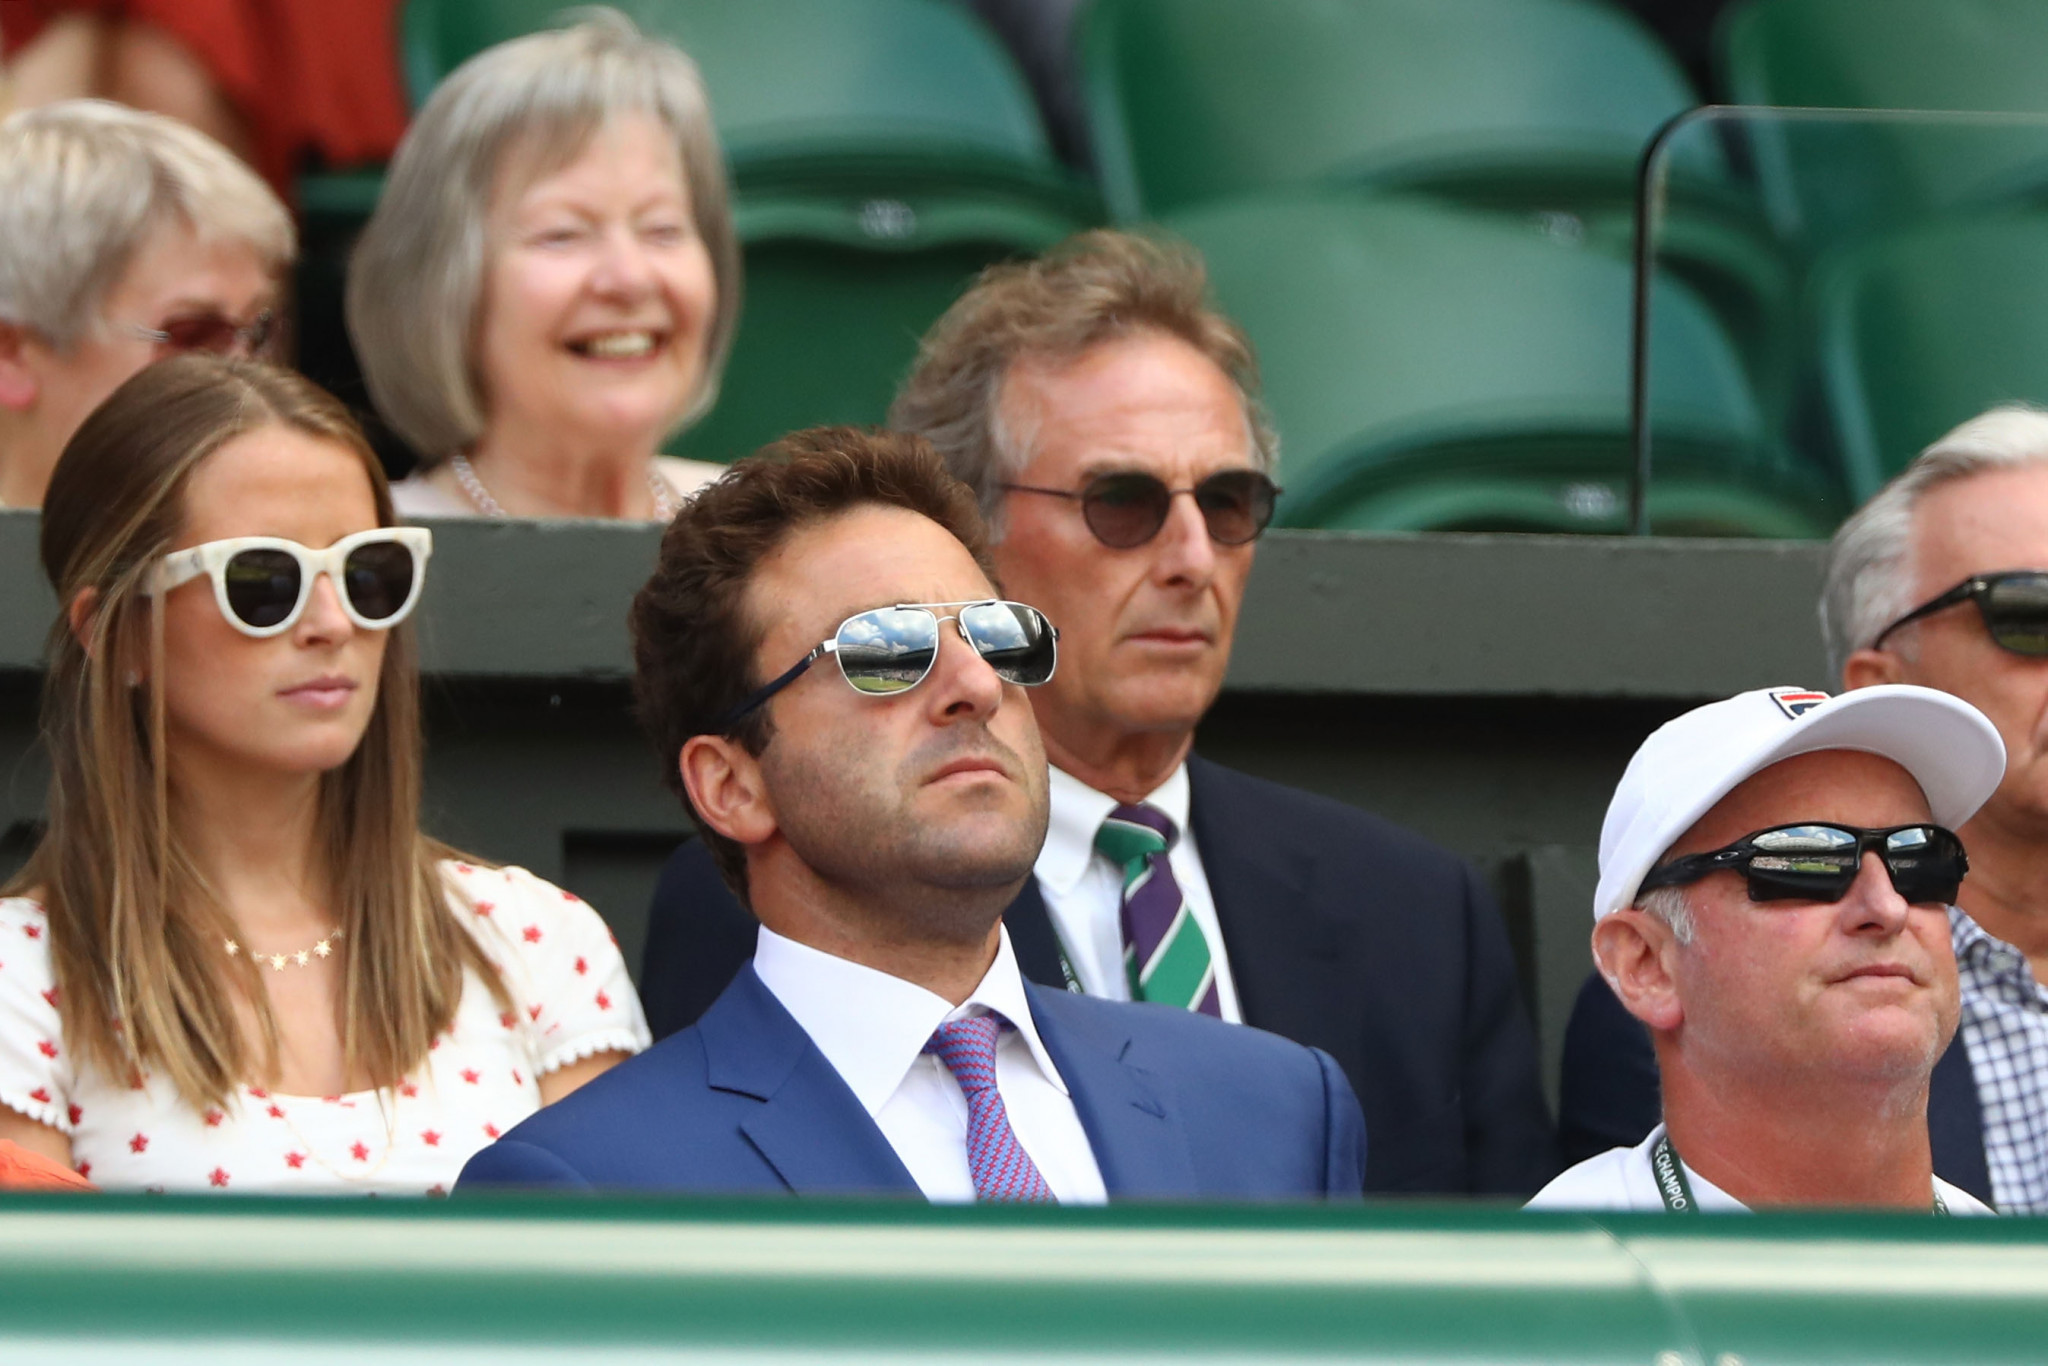 Justin Gimelstob, pictured centre, front at Wimbledon last year, faces an uncertain future in tennis following his guilty plea to what a Los Angeles judge called a "violent, unprovoked attack" ©Getty Images